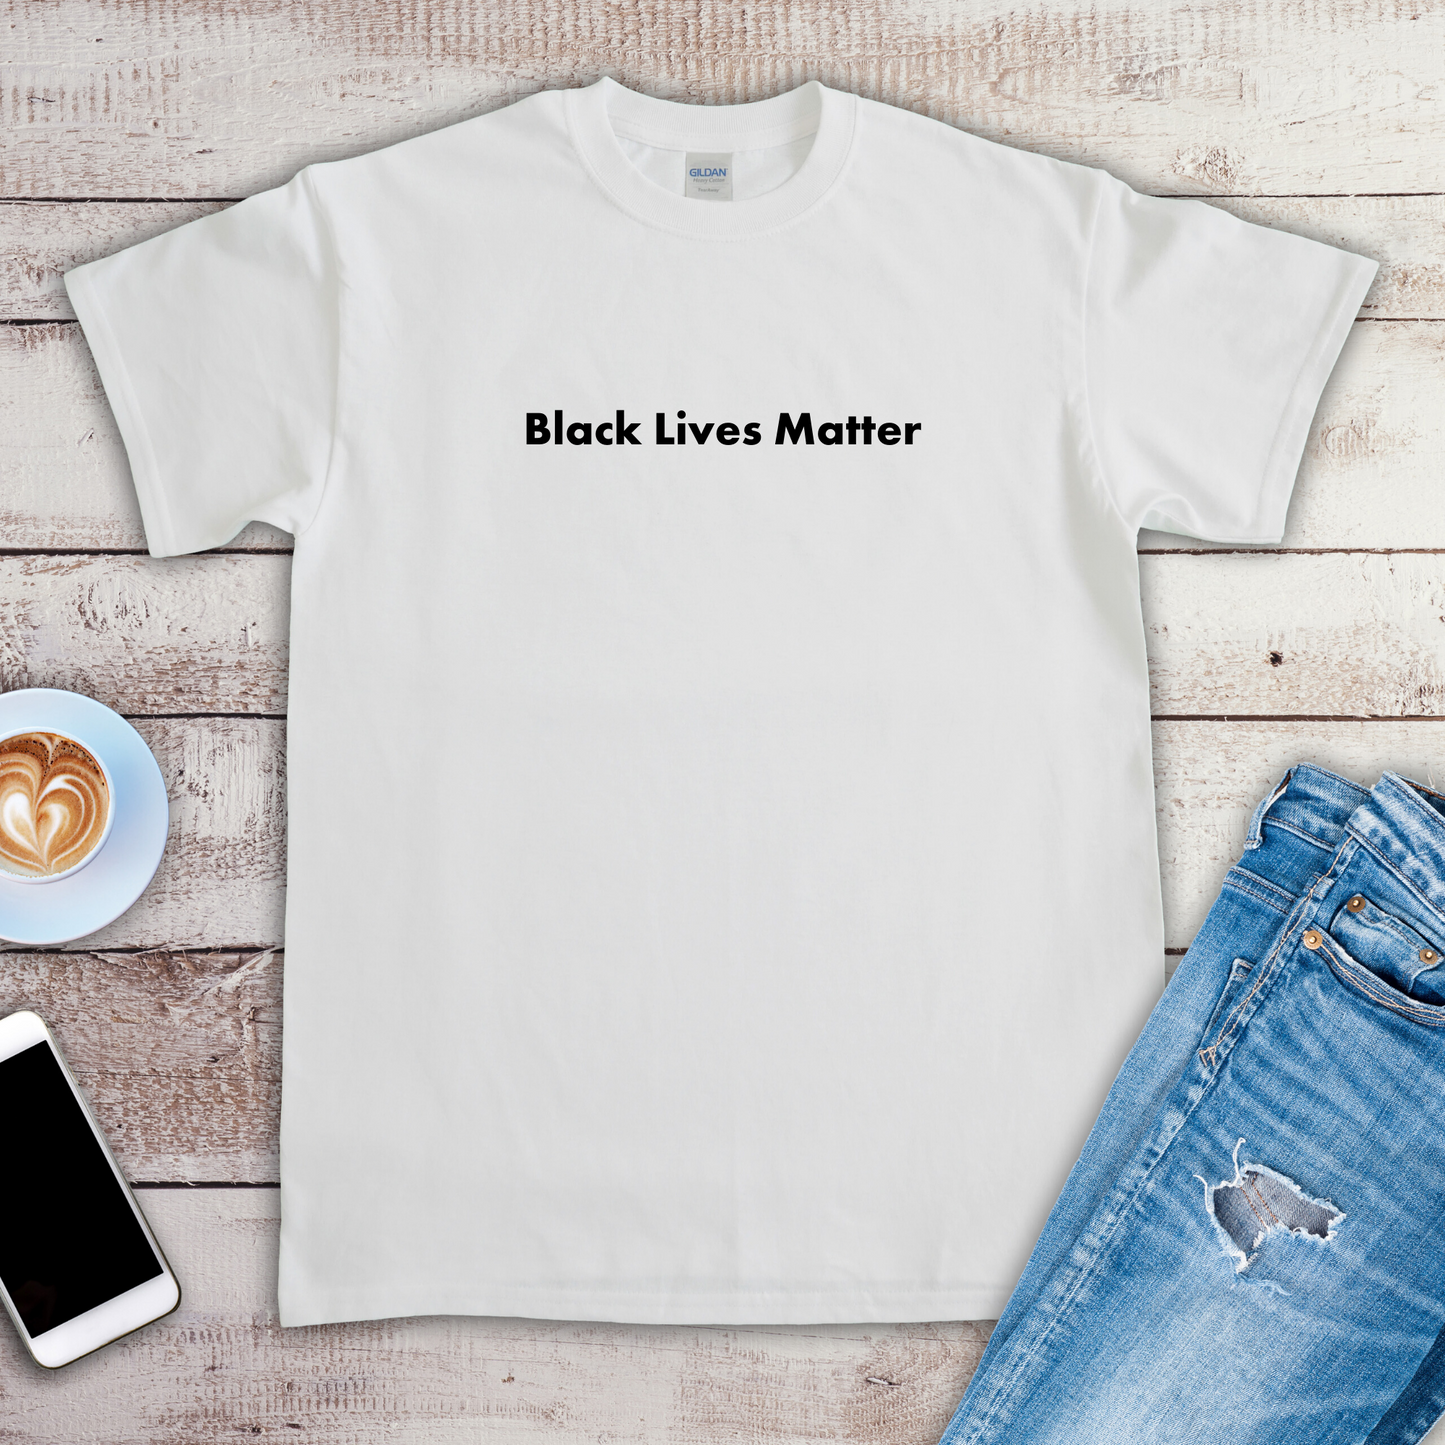 A white t-shirt is laying on a wooden floor. The t-shirt has a statement on it that says "Black lives matter". There are a pair of jeans, a phone, and a cup of coffee next to the t-shirt.